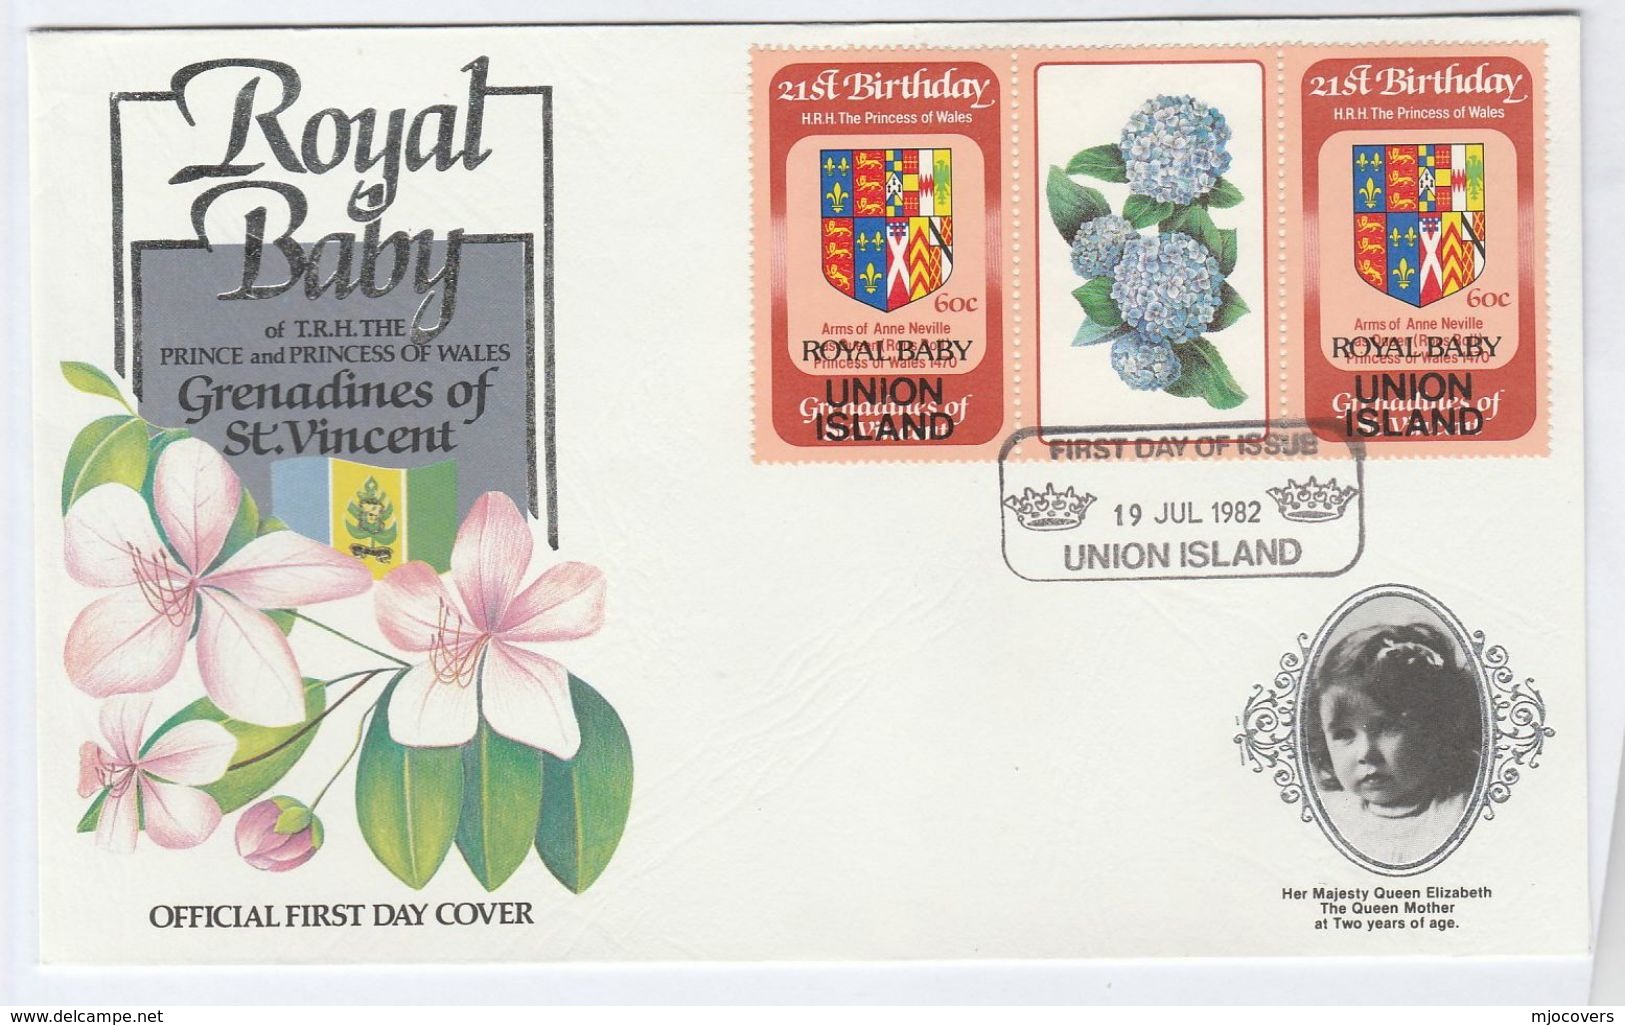 1982 FDC UNION ISLAND ROYAL BABY Ovpt Princess Diana Birthday Flower Stamps Royalty Cover St Vincent Grenadines - Royalties, Royals